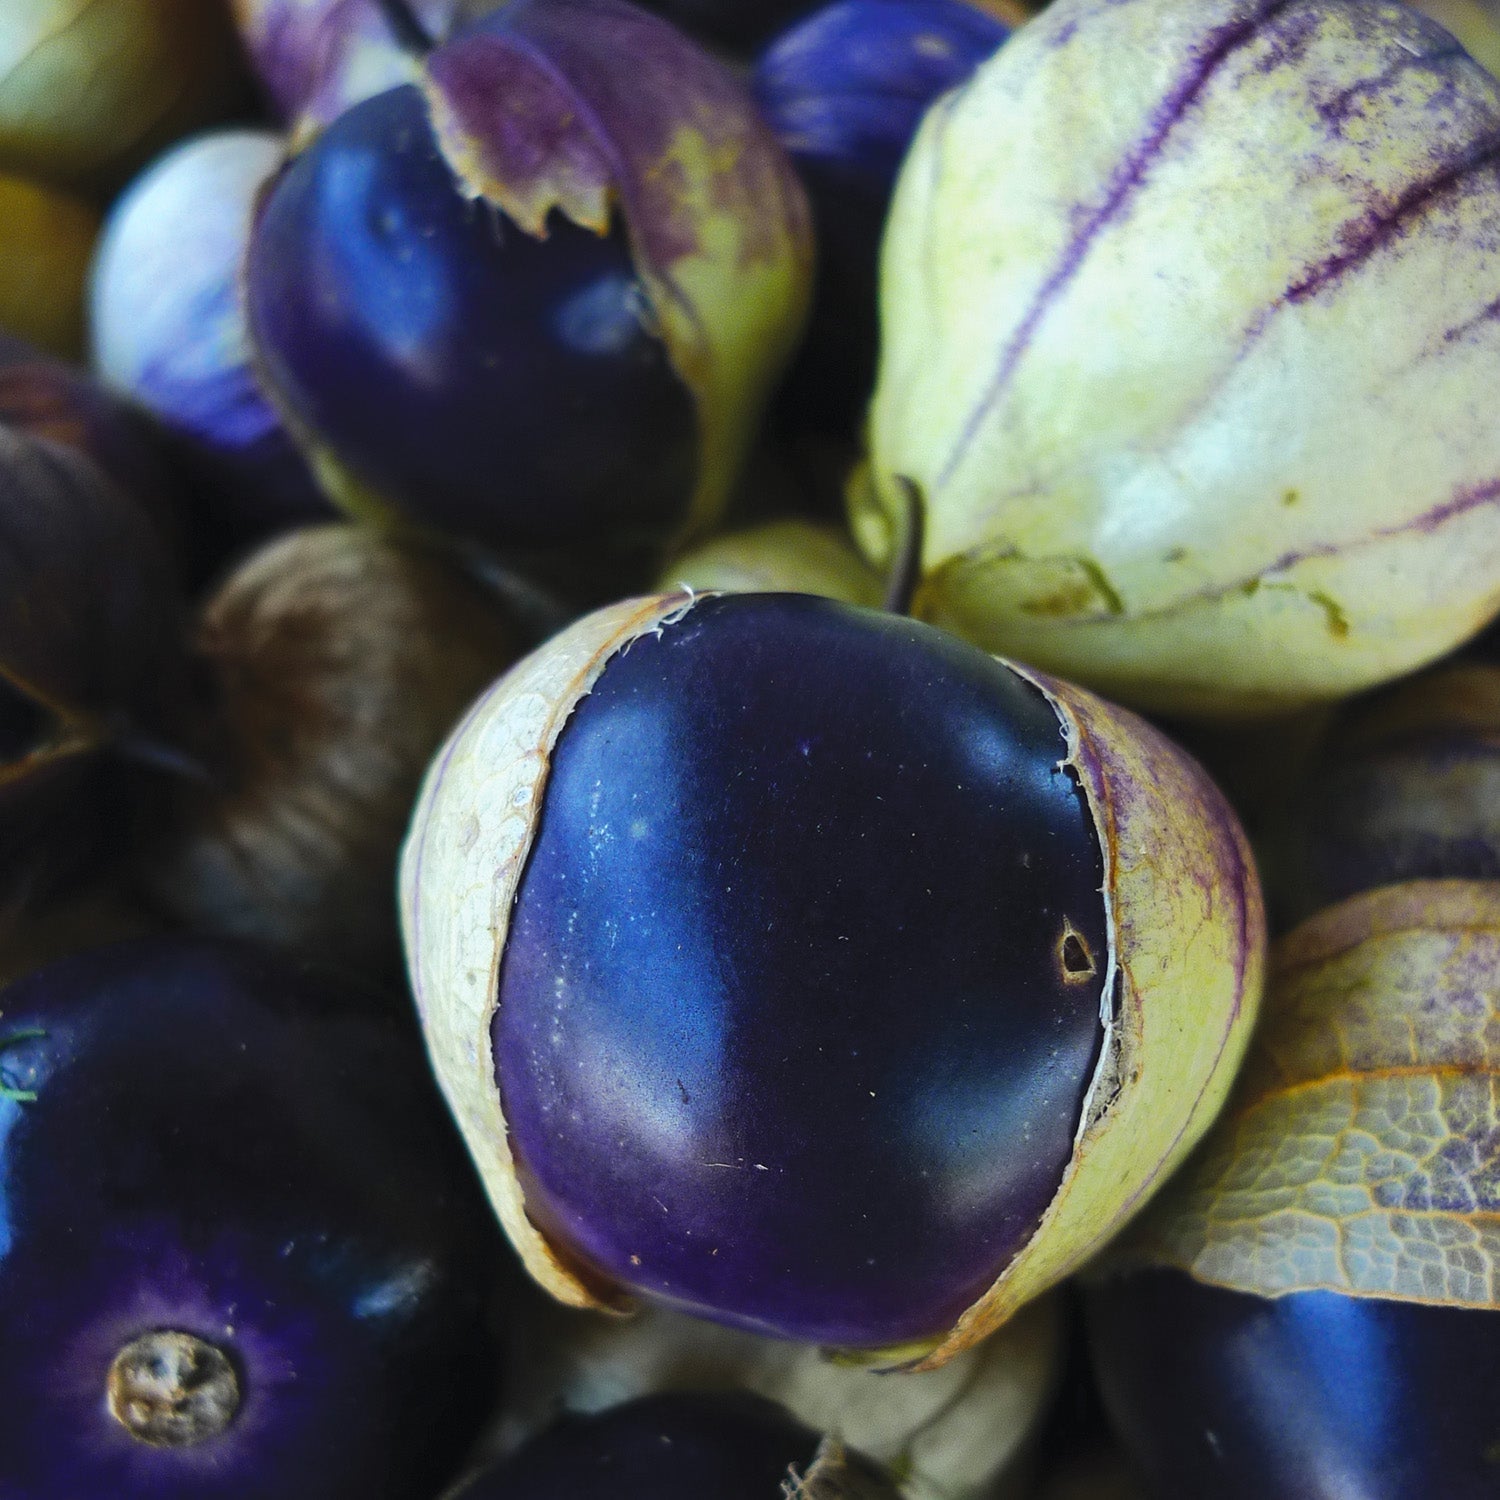 Purple Tomatillo seeds, image displays a close-up of this deep, rich colored purple tomatillo sitting inside of a maroon-veined husk.